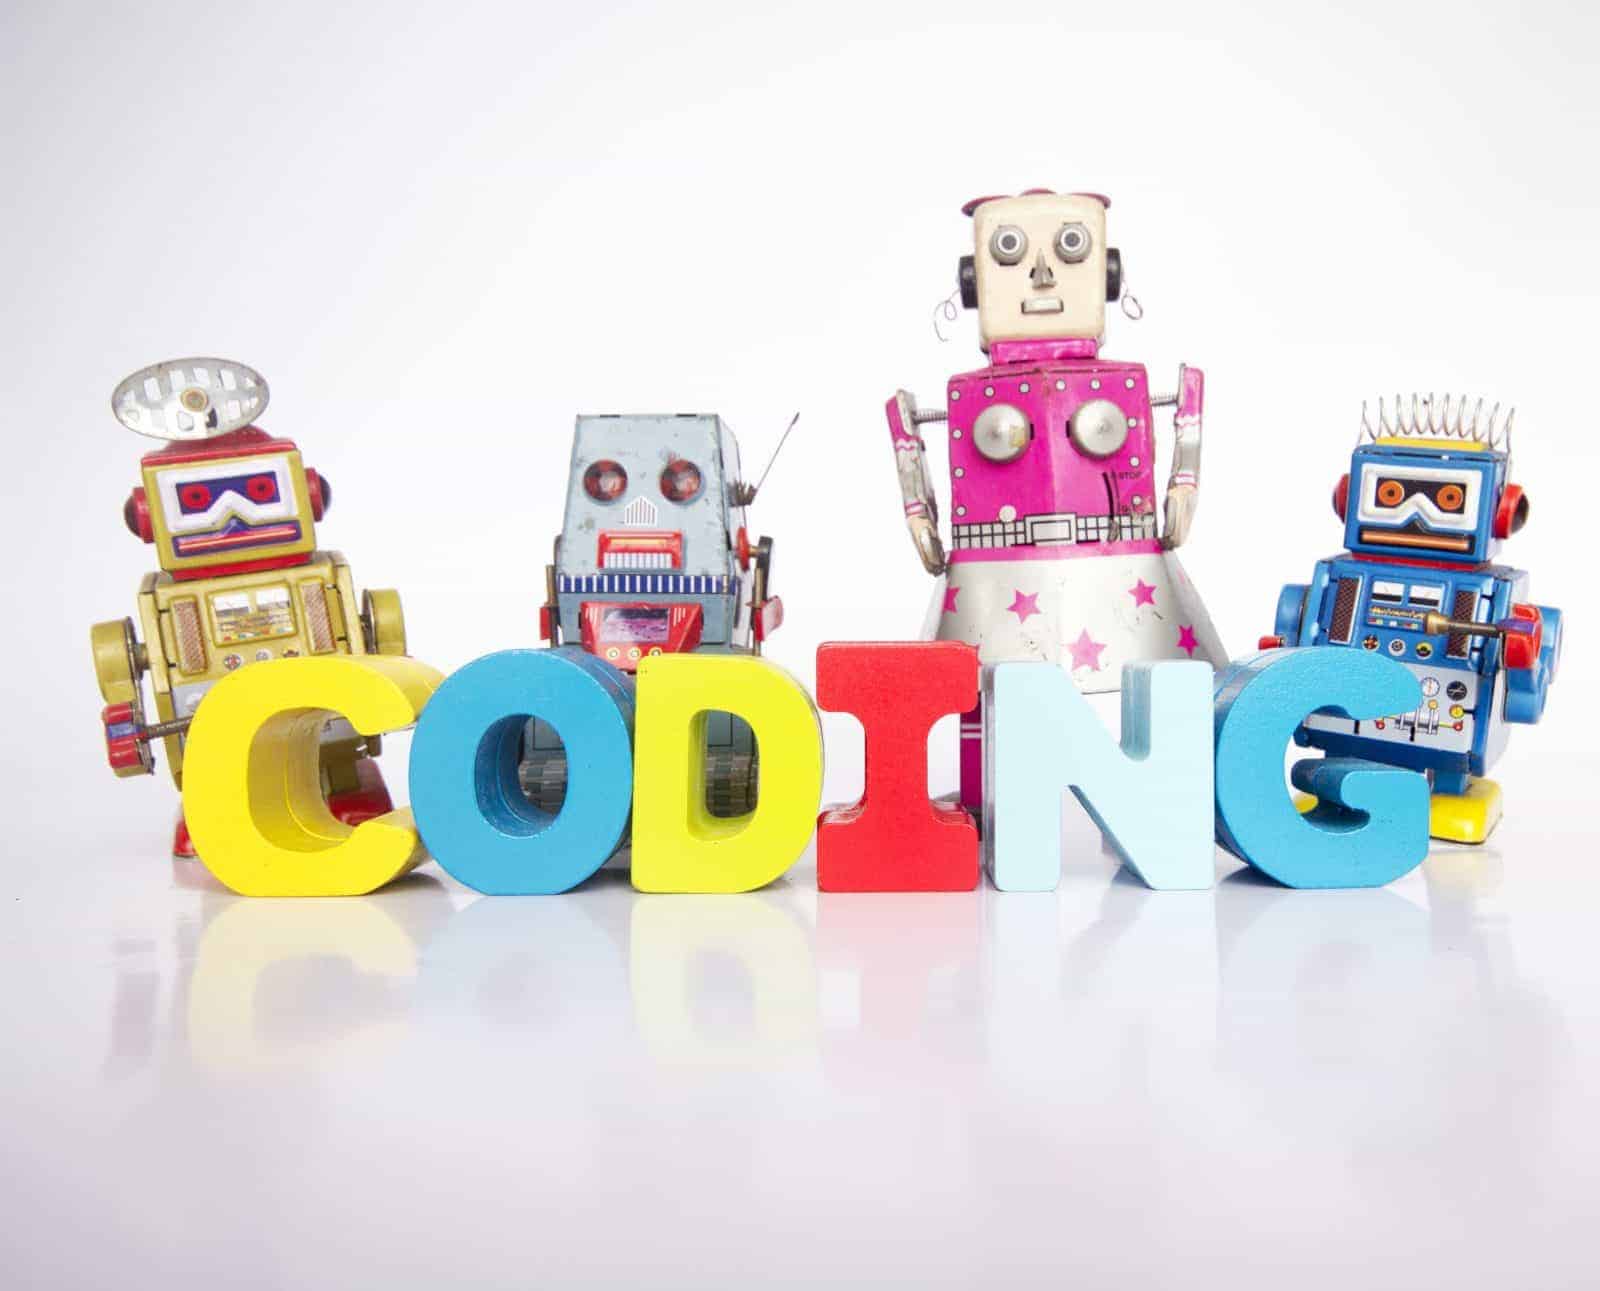 coding robots for kids-8053be75